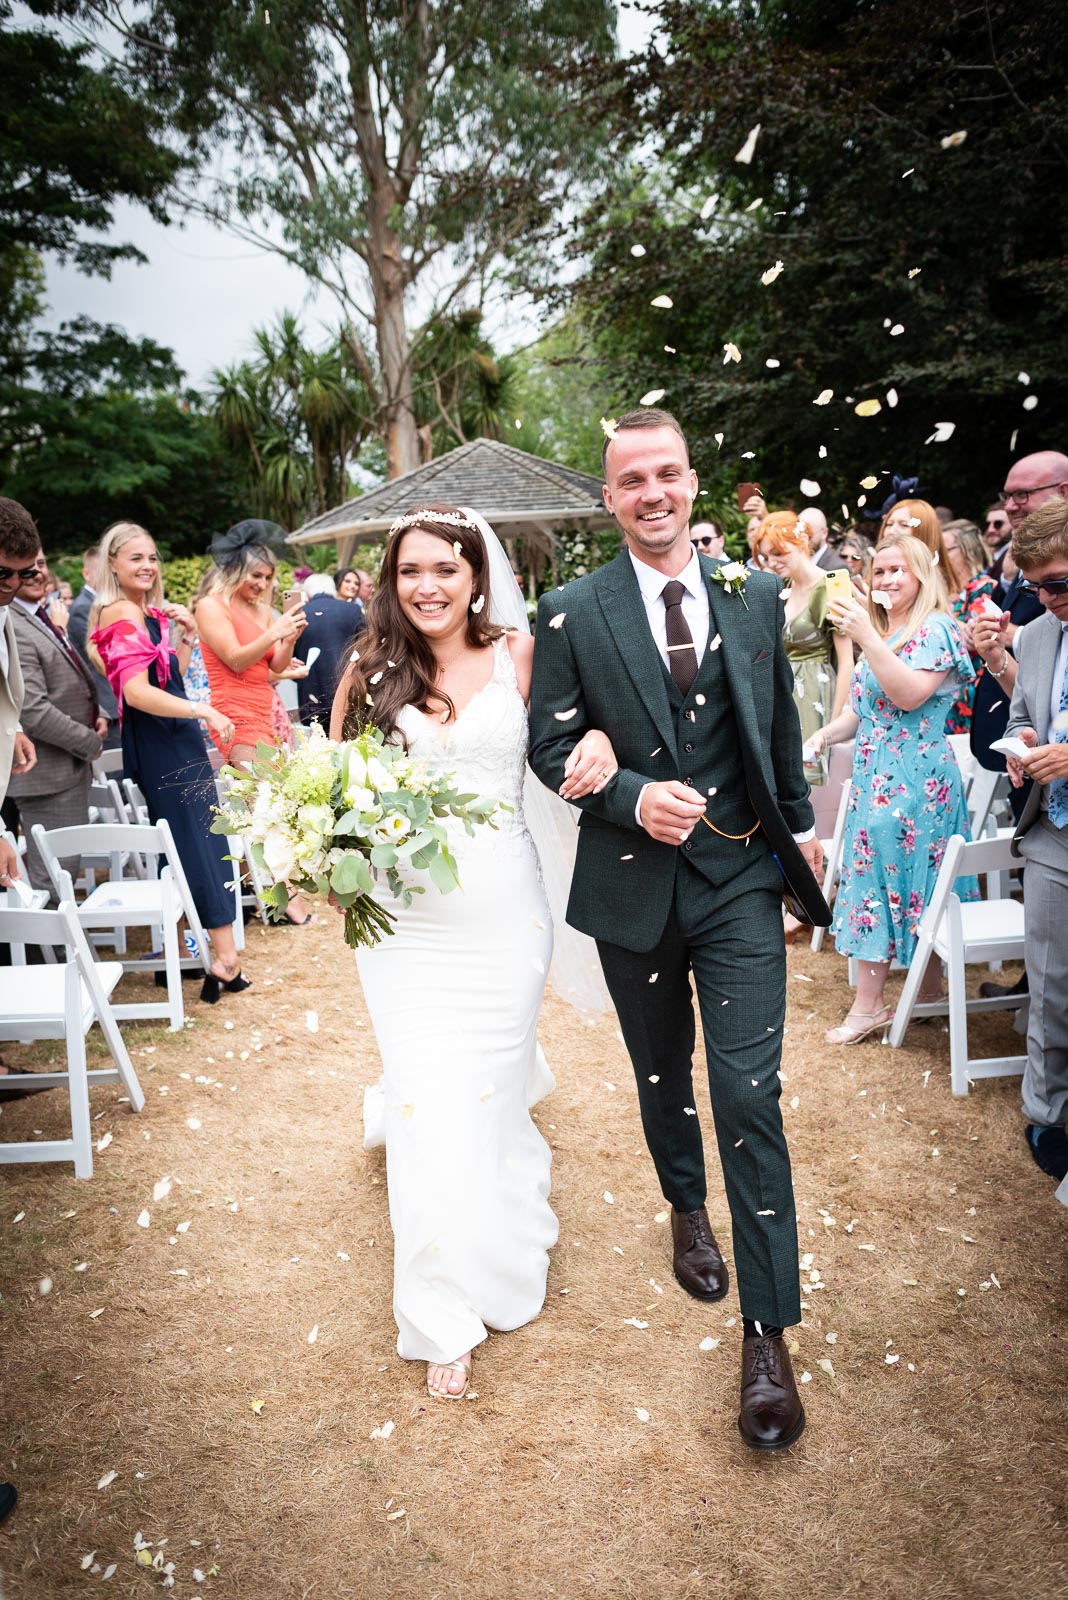 Natalie and Dean walk through petal confetti thrown by their guests after their wedding on front of the gazebo in the garden at Pelham House Hotel, Lewes. 